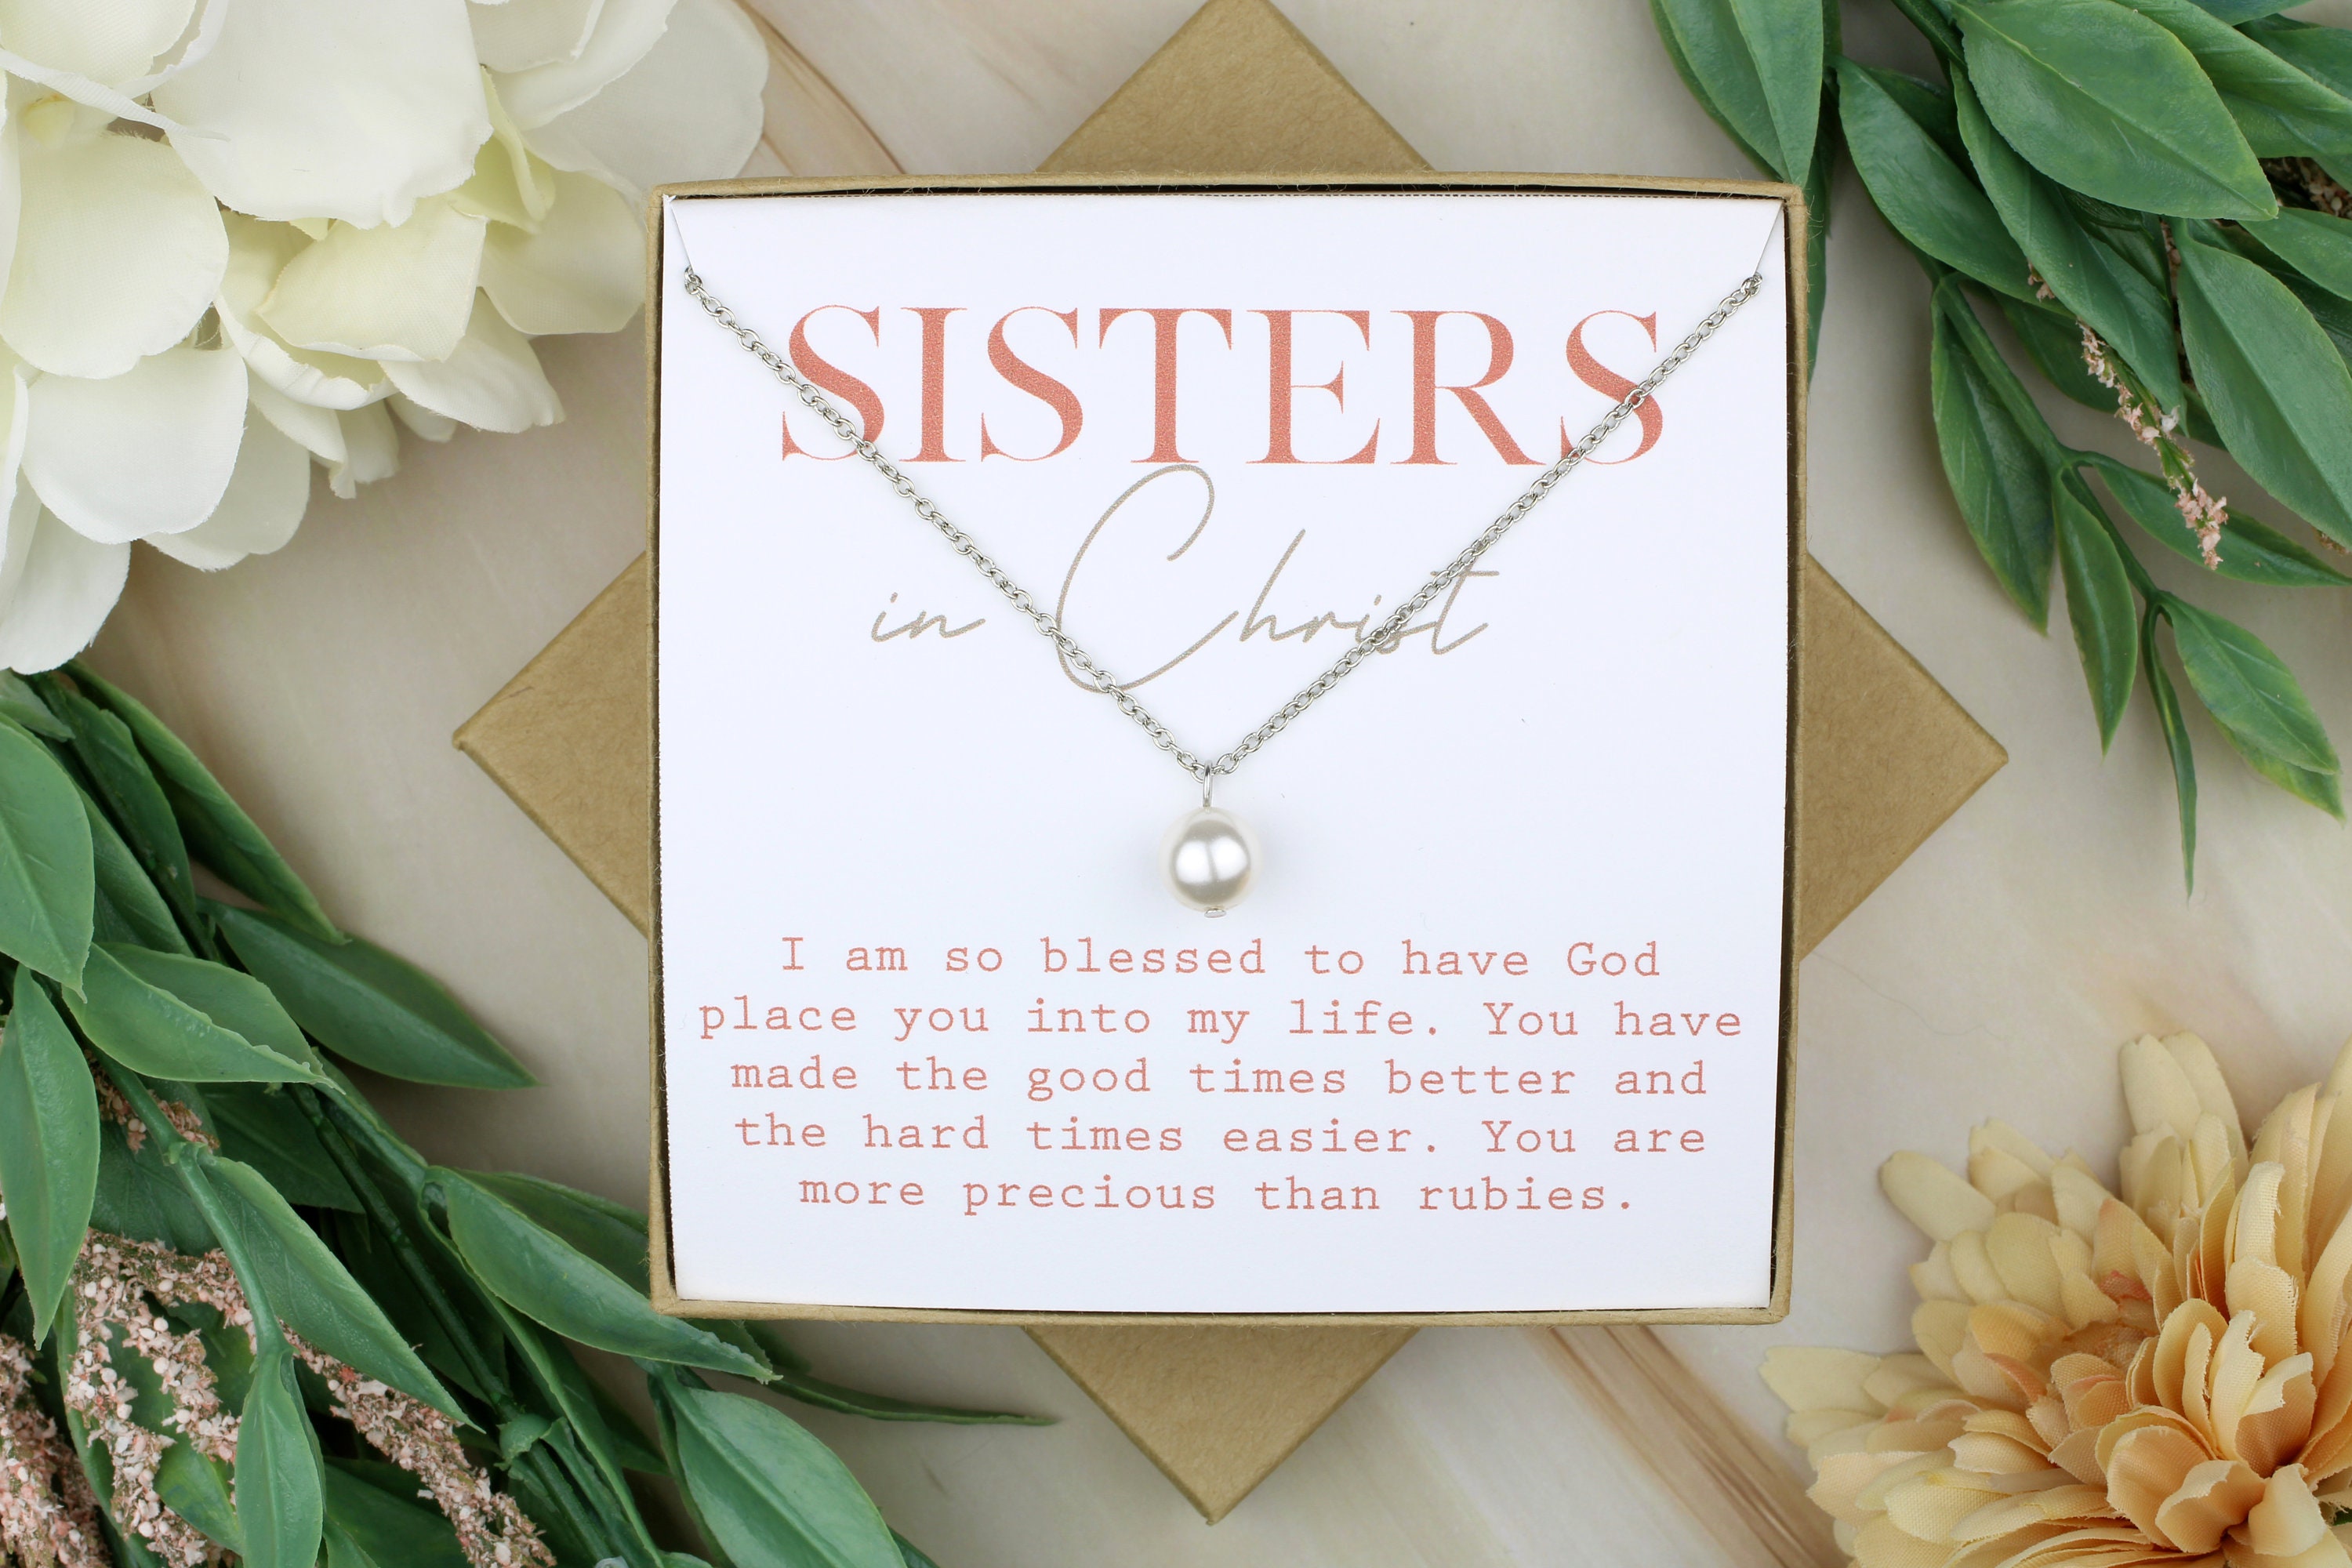 Unique Gifts for Women under $40 — Life of a Sister